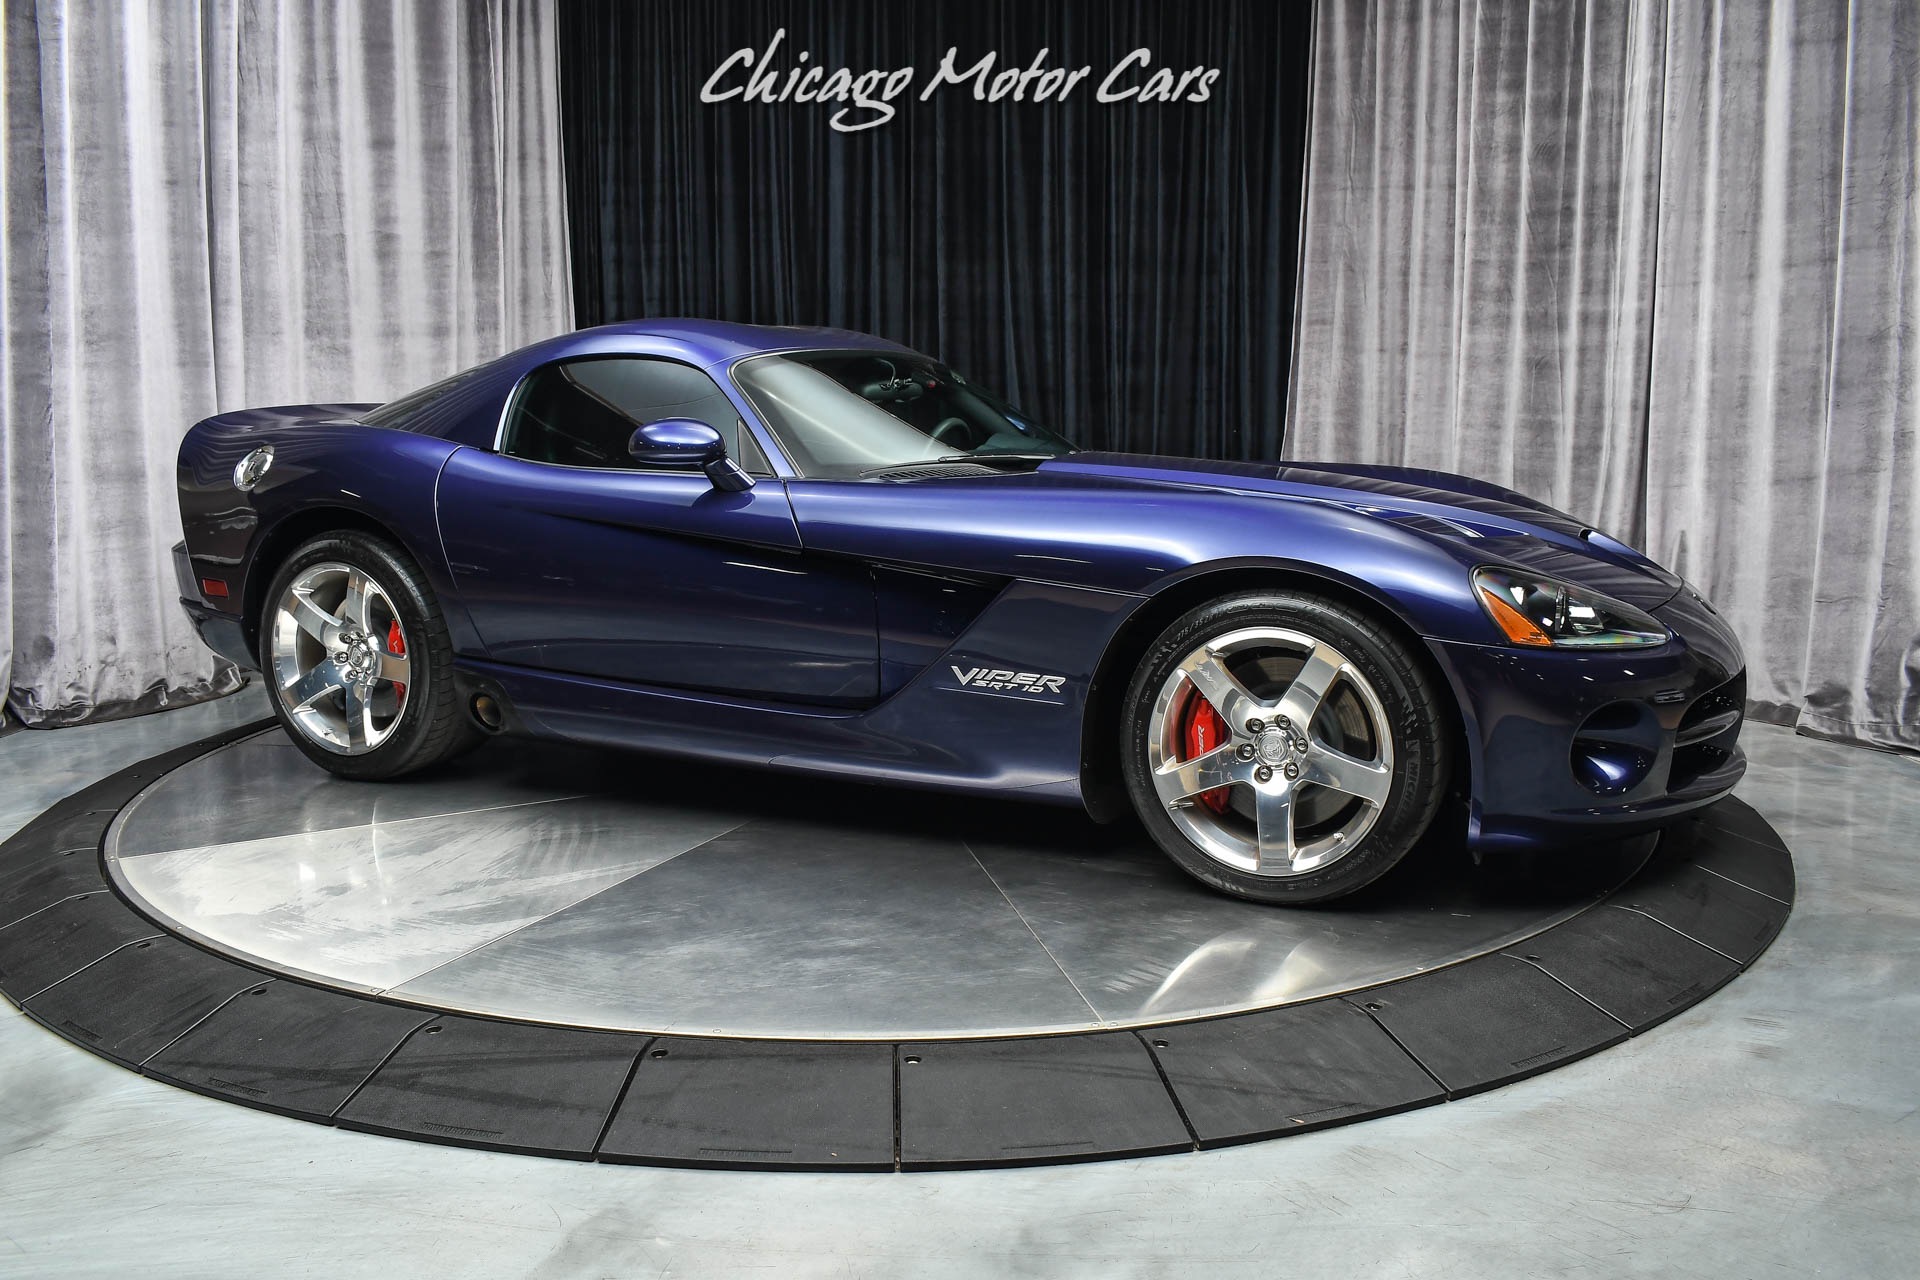 Used-2008-Dodge-Viper-SRT-10-Coupe-Only-12k-Miles-RARE-Pristine-Example-Serviced